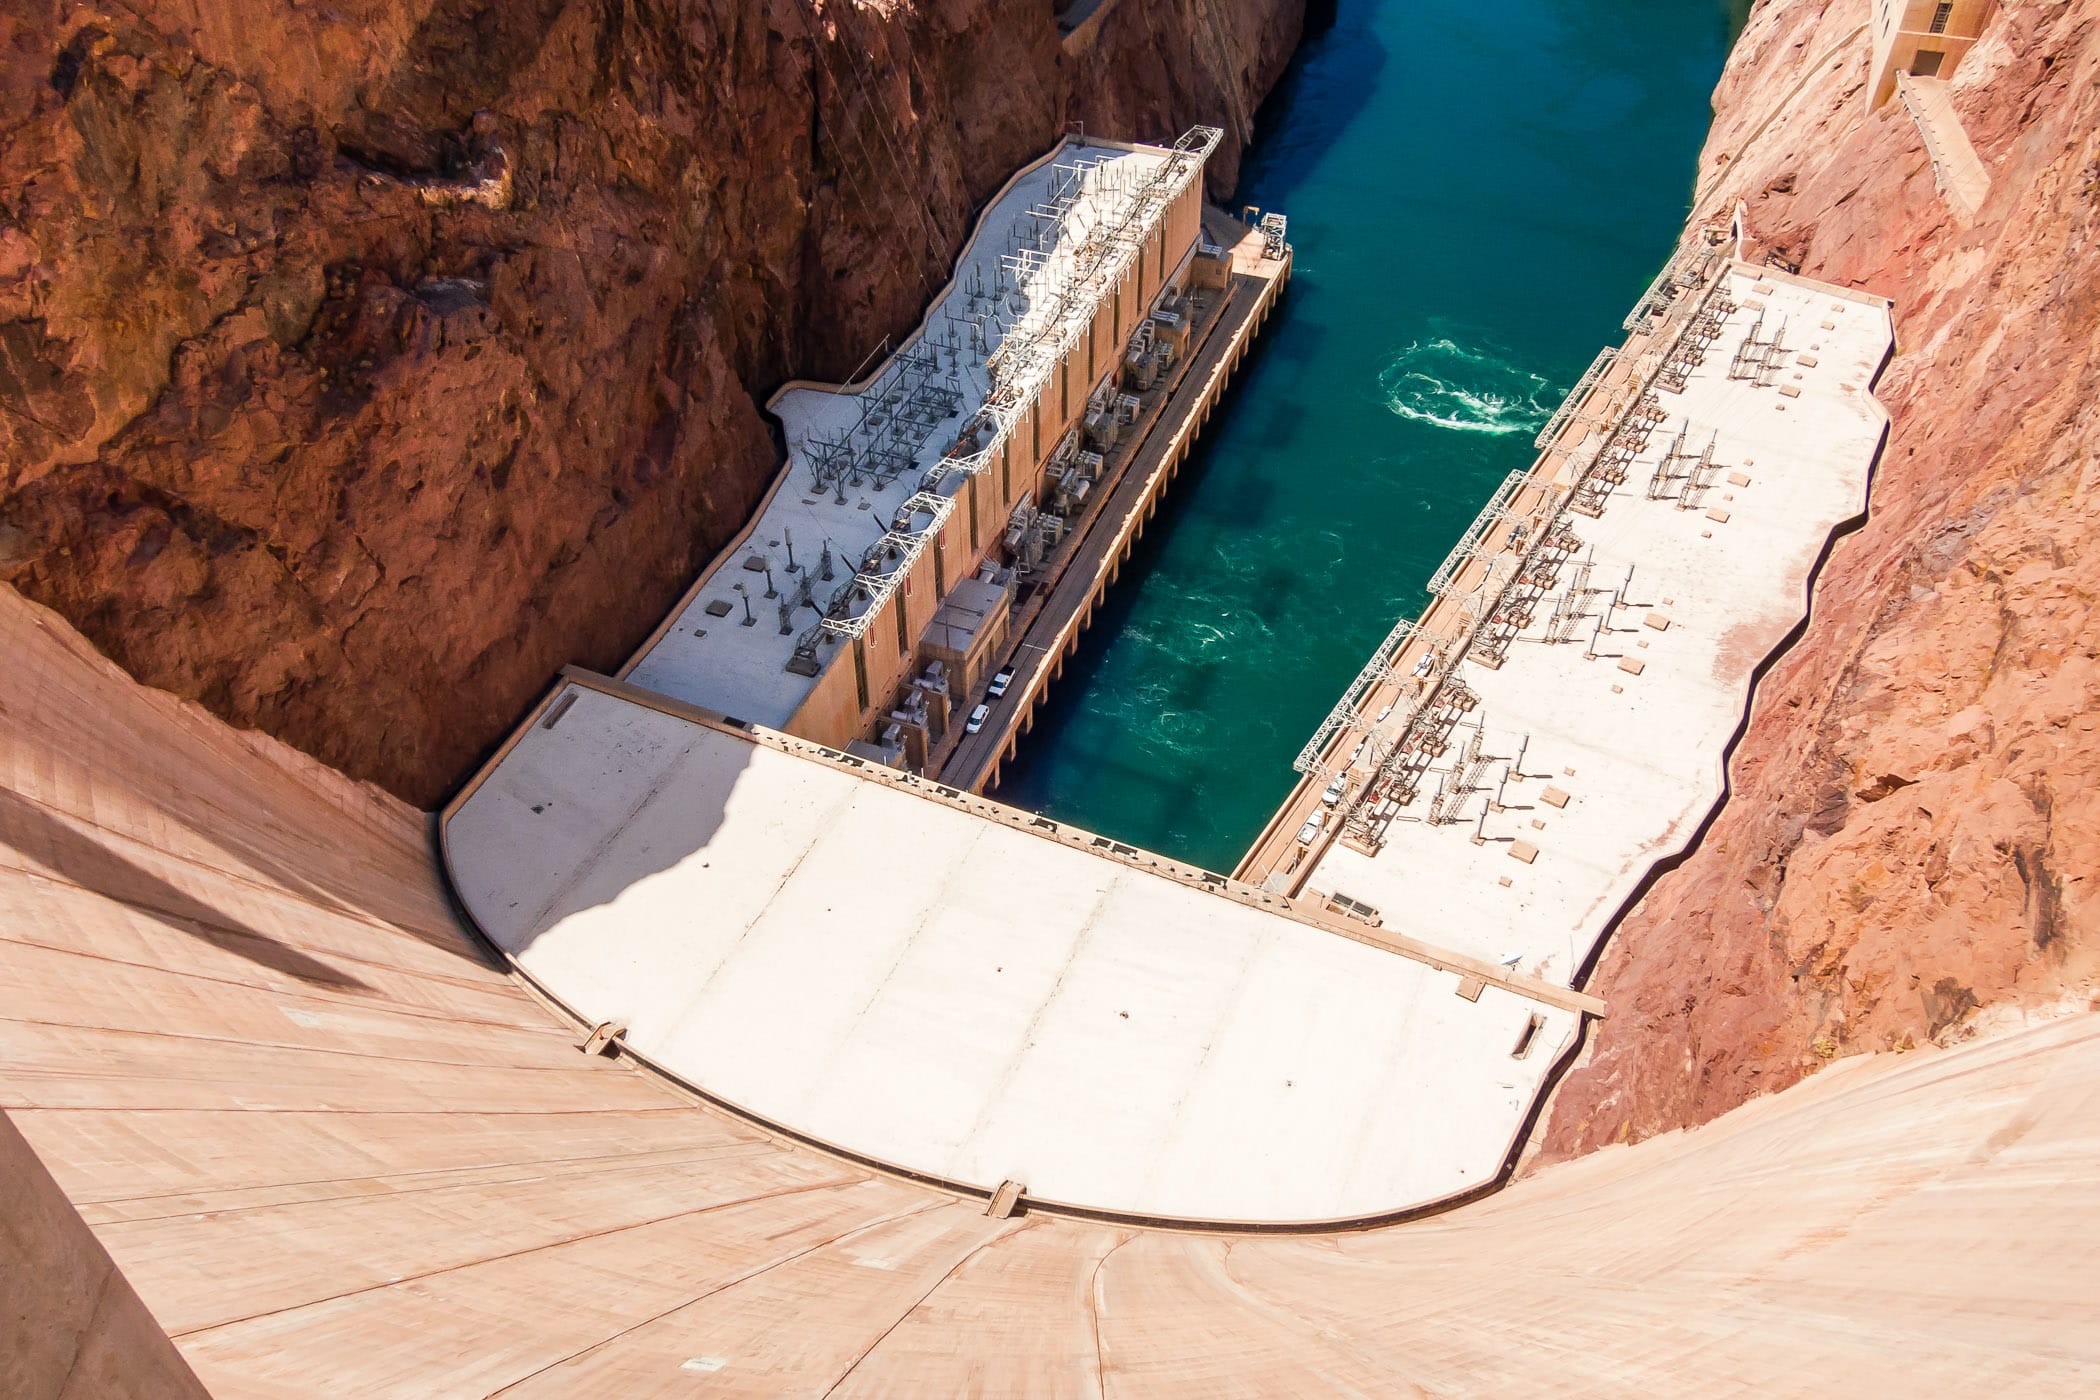 Looking down the 221 meter (726 ft.) tall Hoover Dam on the Colorado River at the border of Nevada and Arizona.